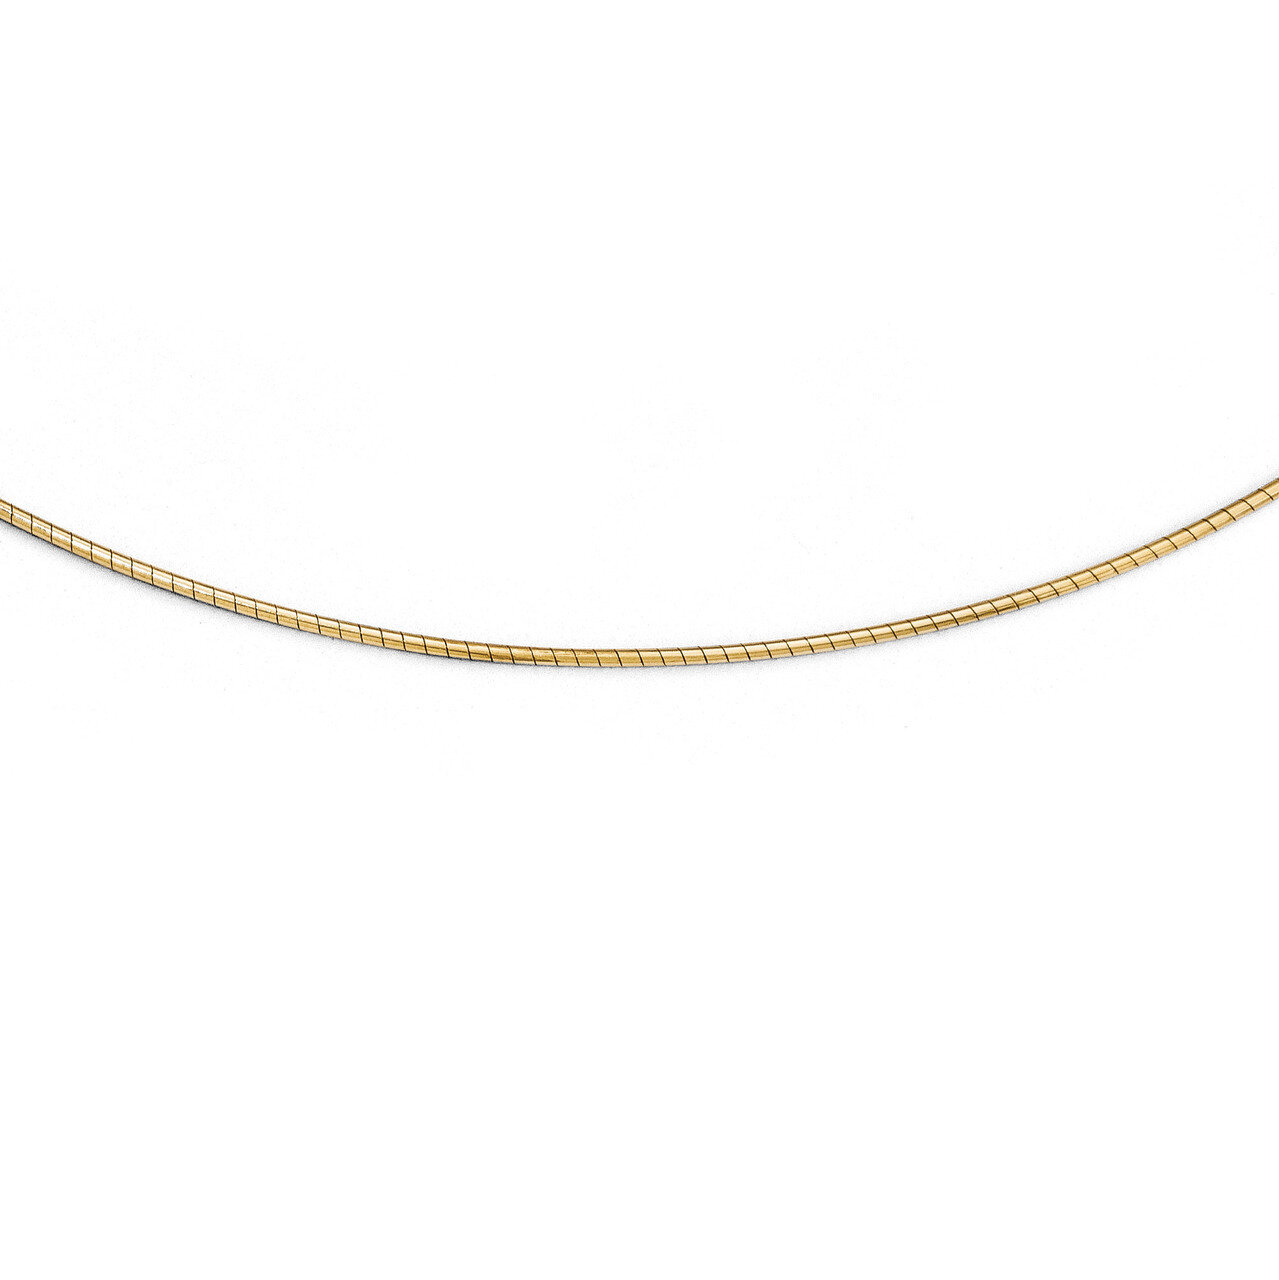 1MM Round Omega/Detachable clasp 18 Inch Chain 14k Gold HB-2804-18